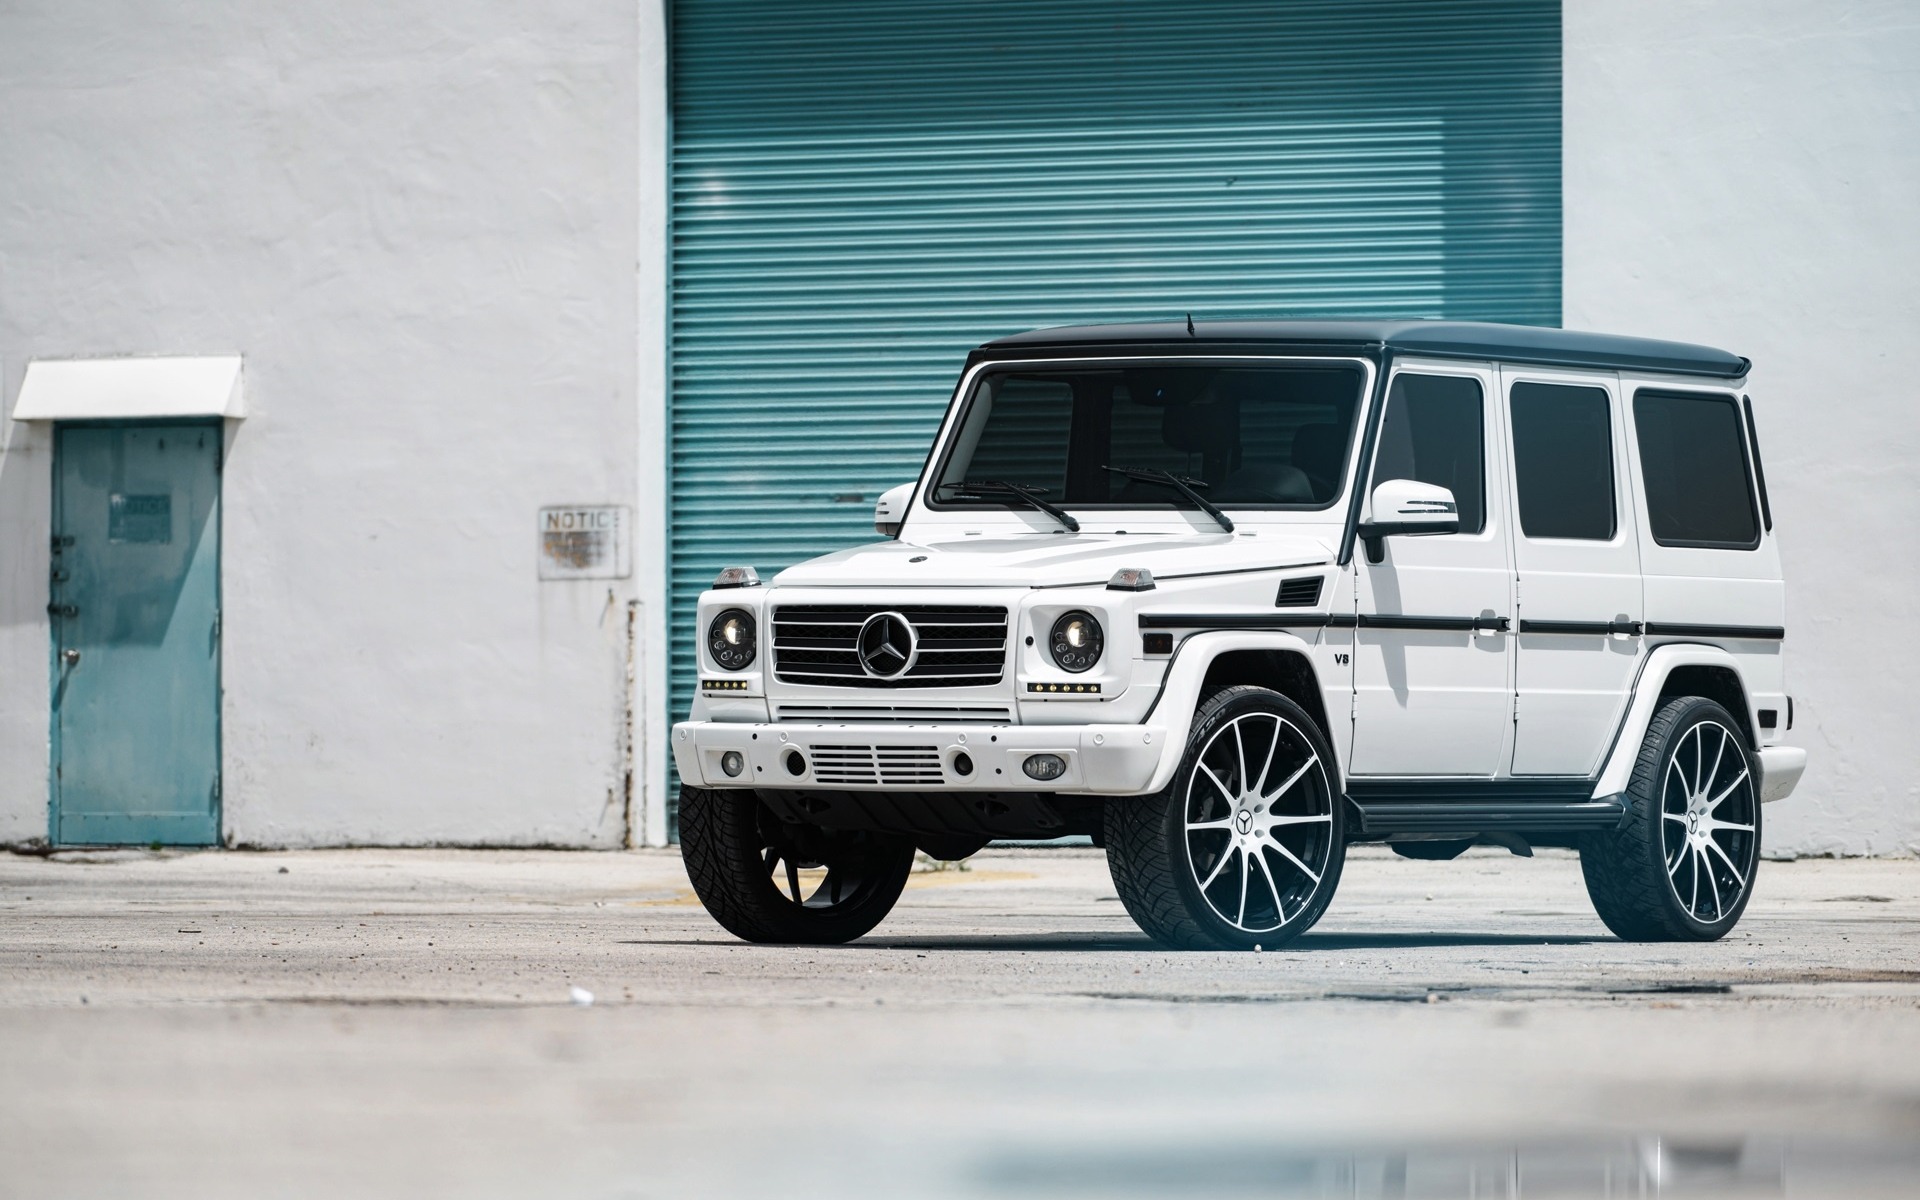 Download Wallpaper Mercedes Benz G W New White G Class, Exterior, Tuning, White SUV, German Cars, Mercedes For Desktop With Resolution 1920x1200. High Quality HD Picture Wallpaper